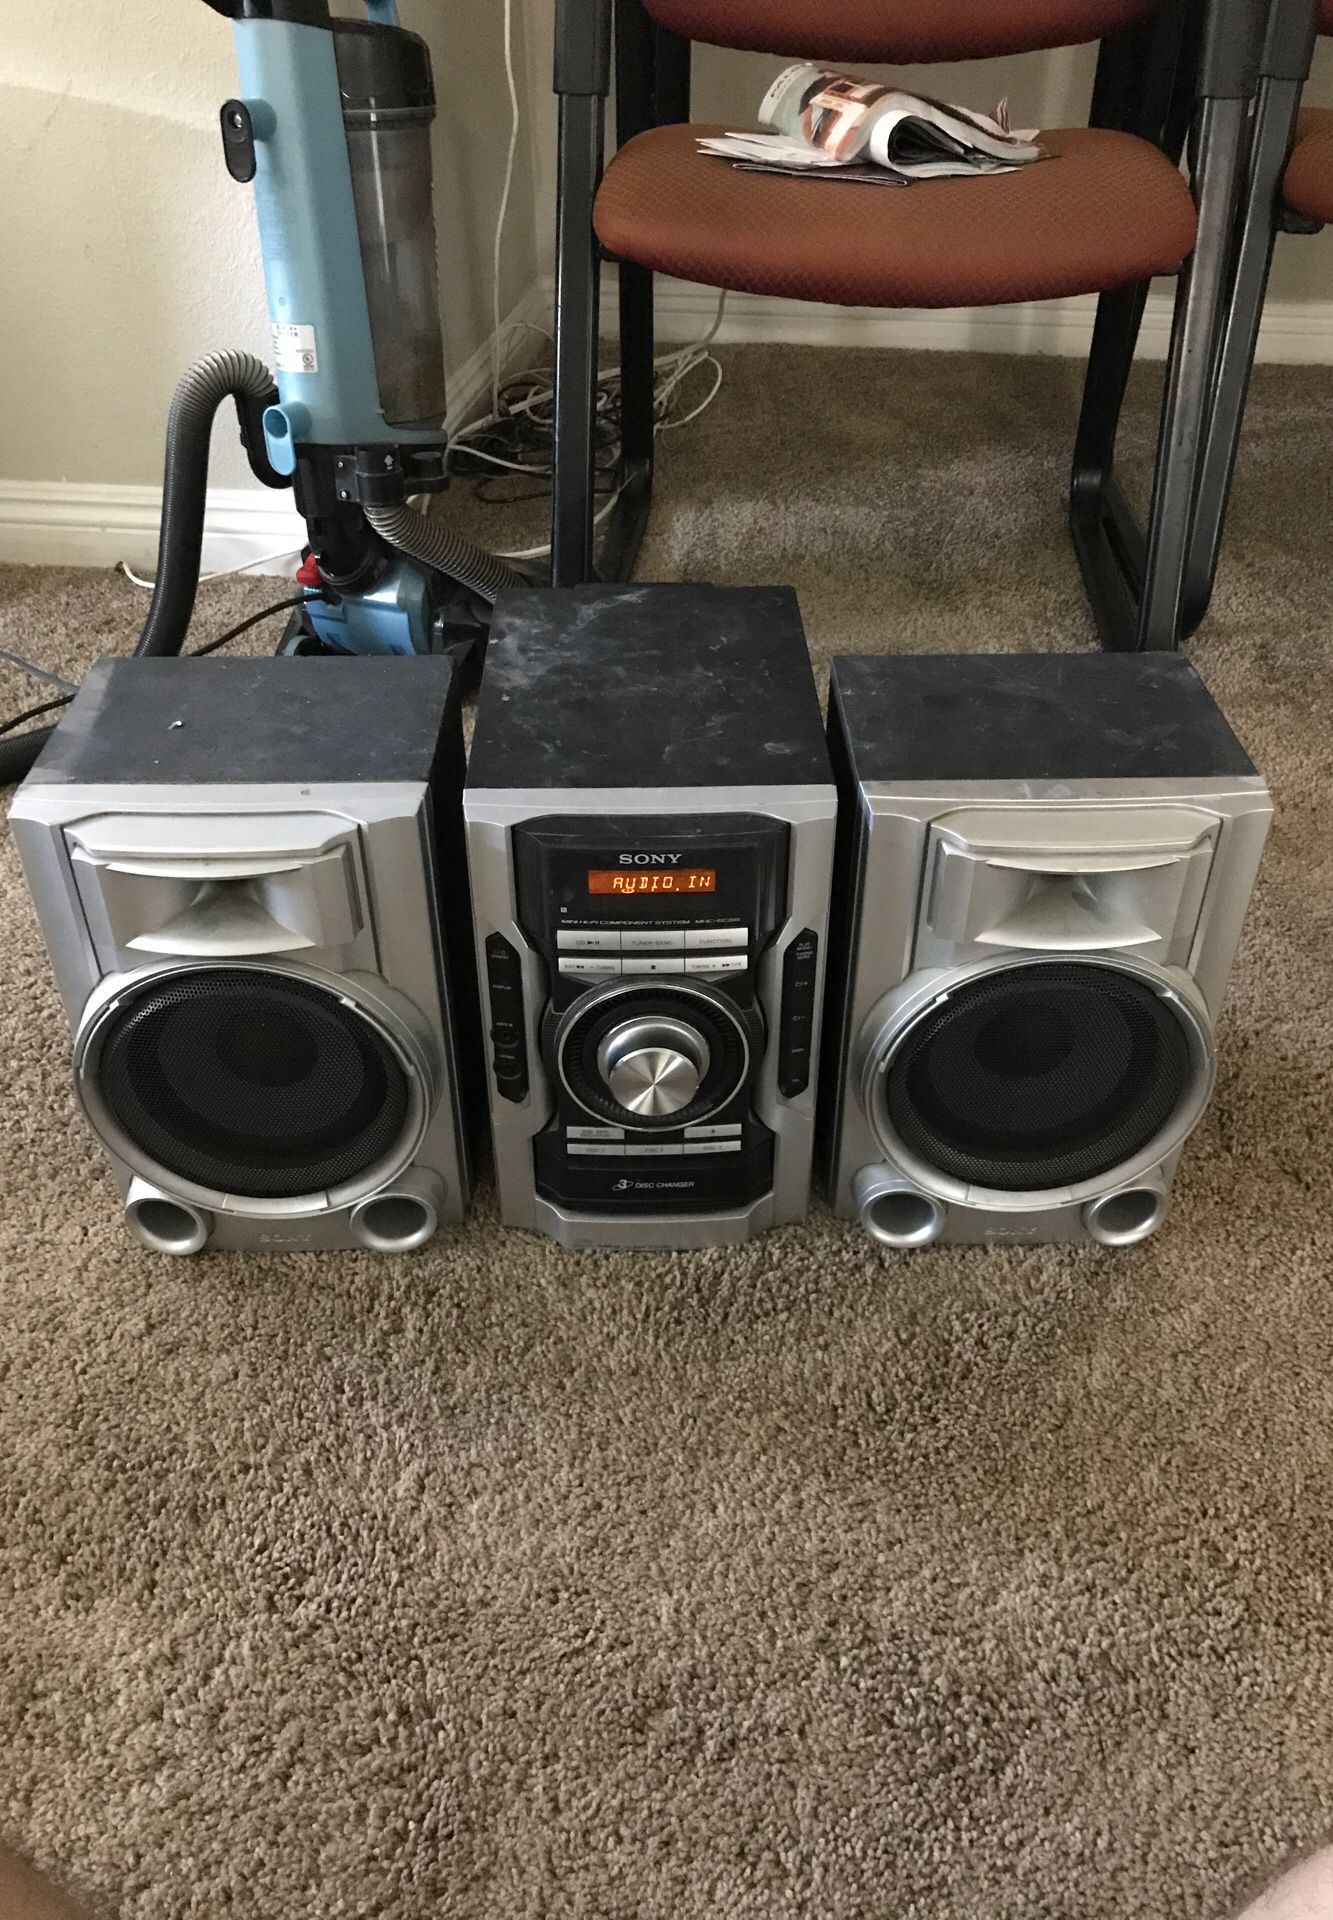 Stereo system with dual speakers